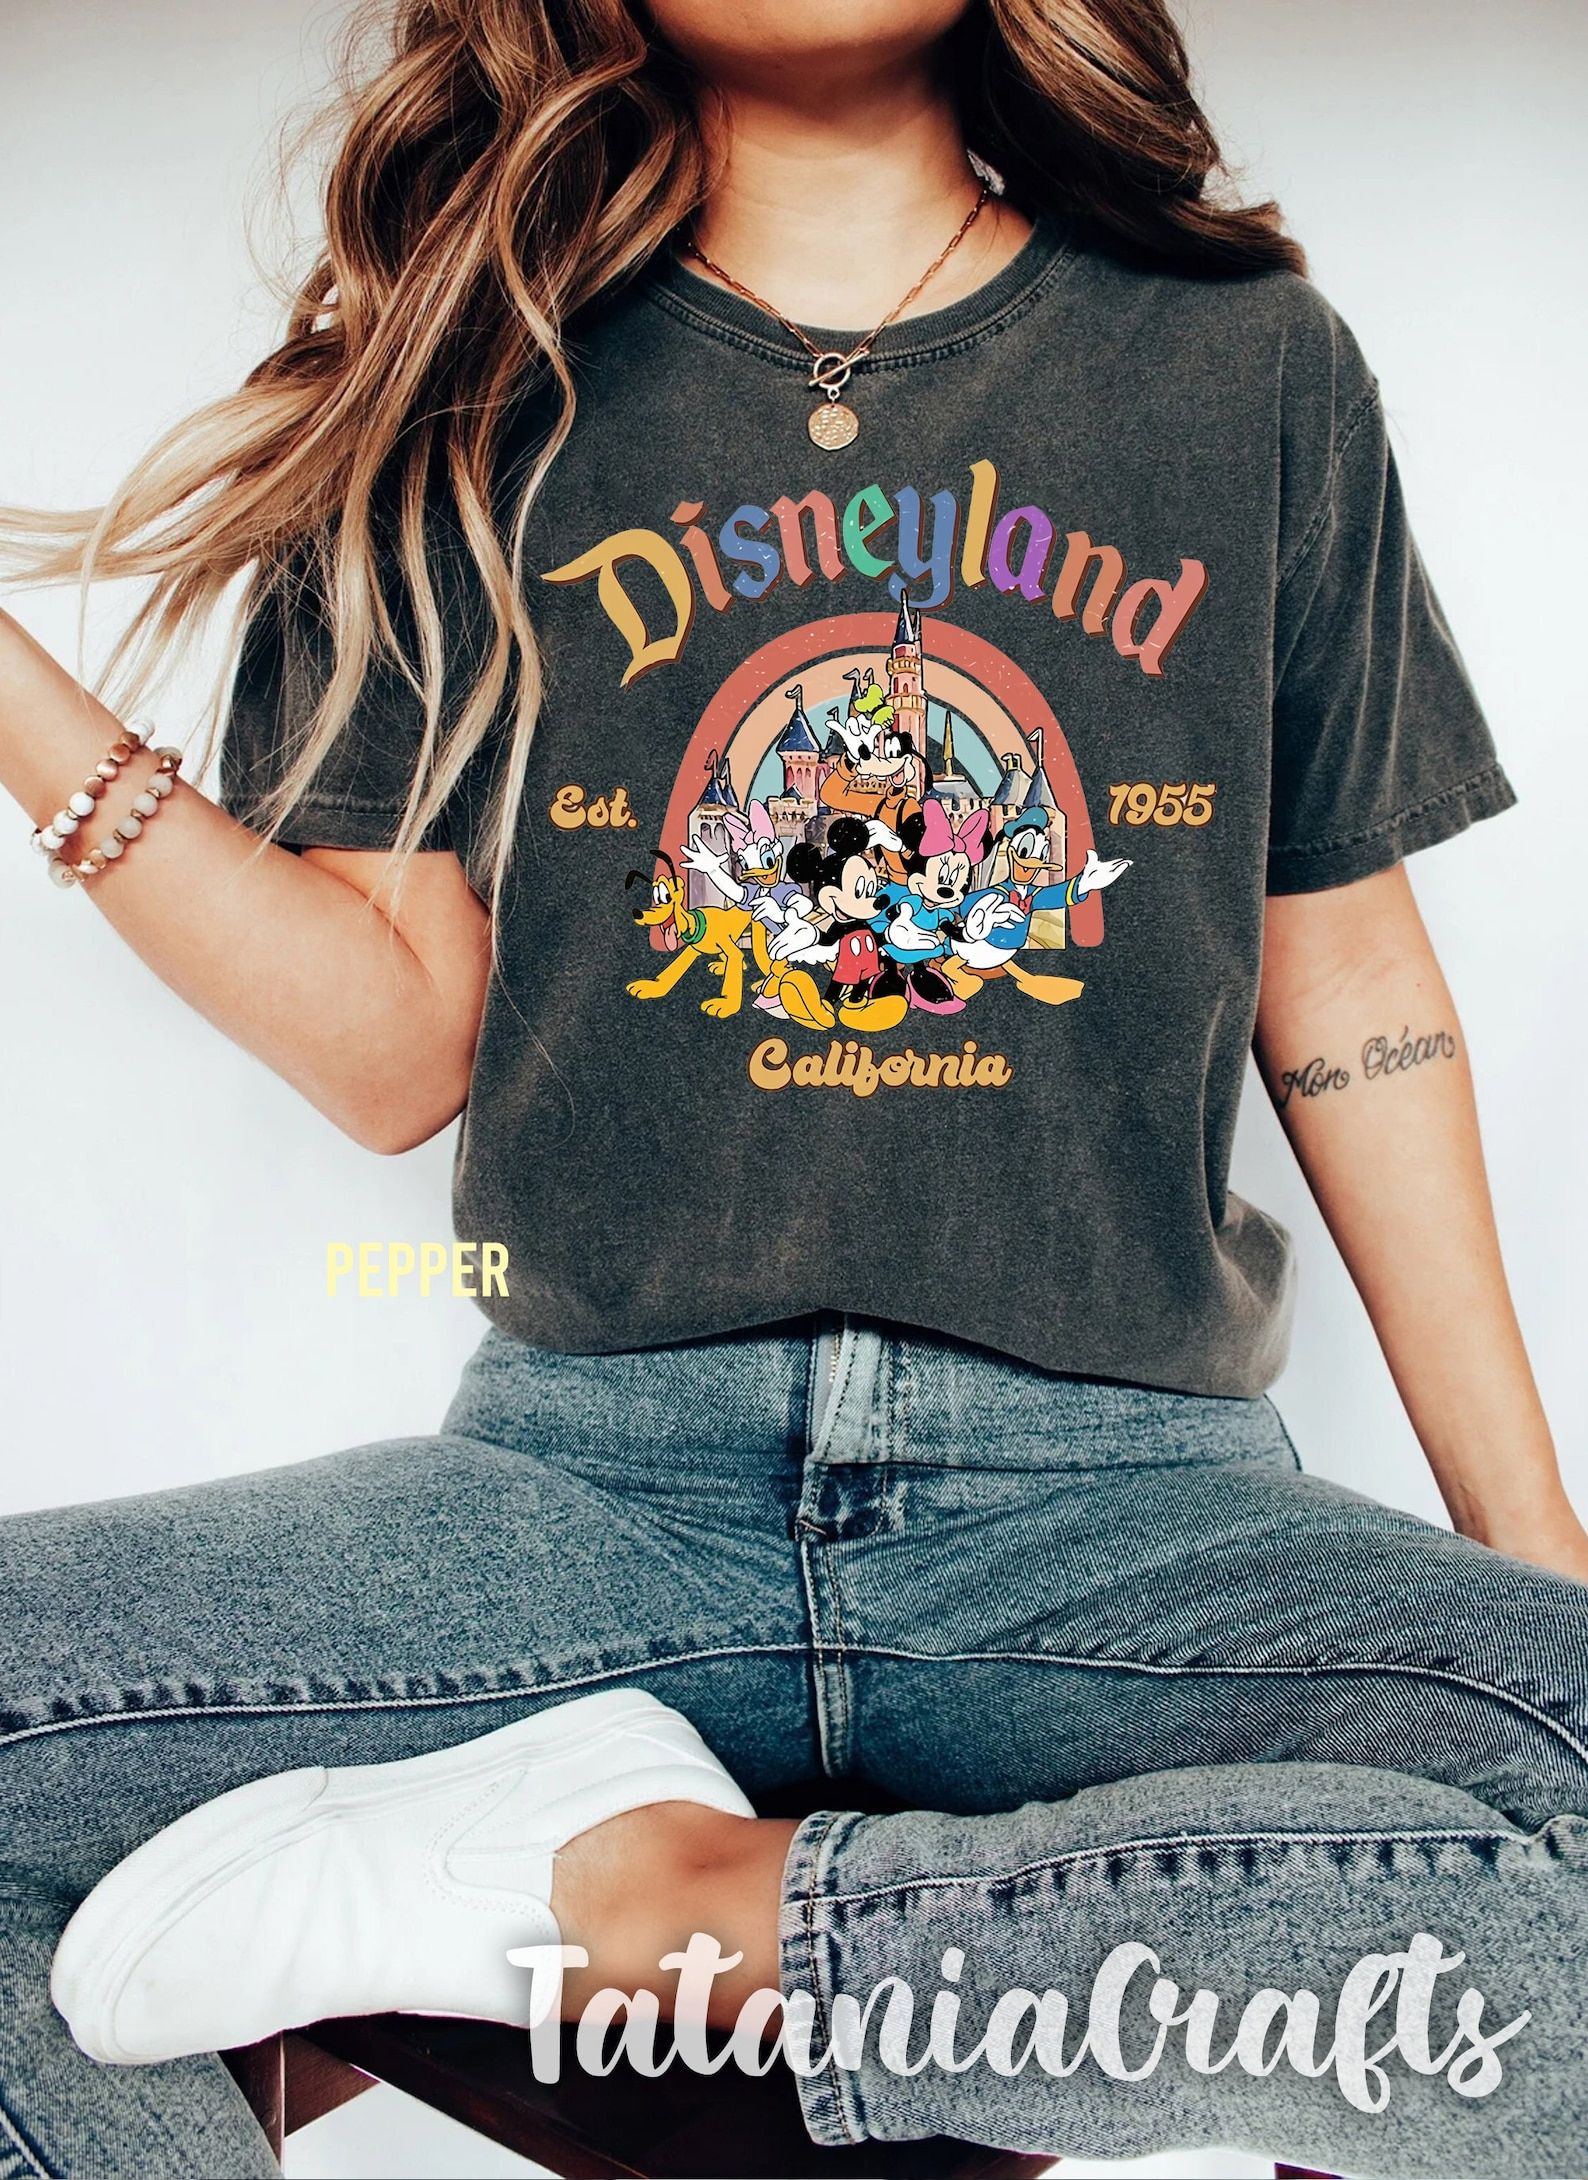 What to wear to Disneyland in April